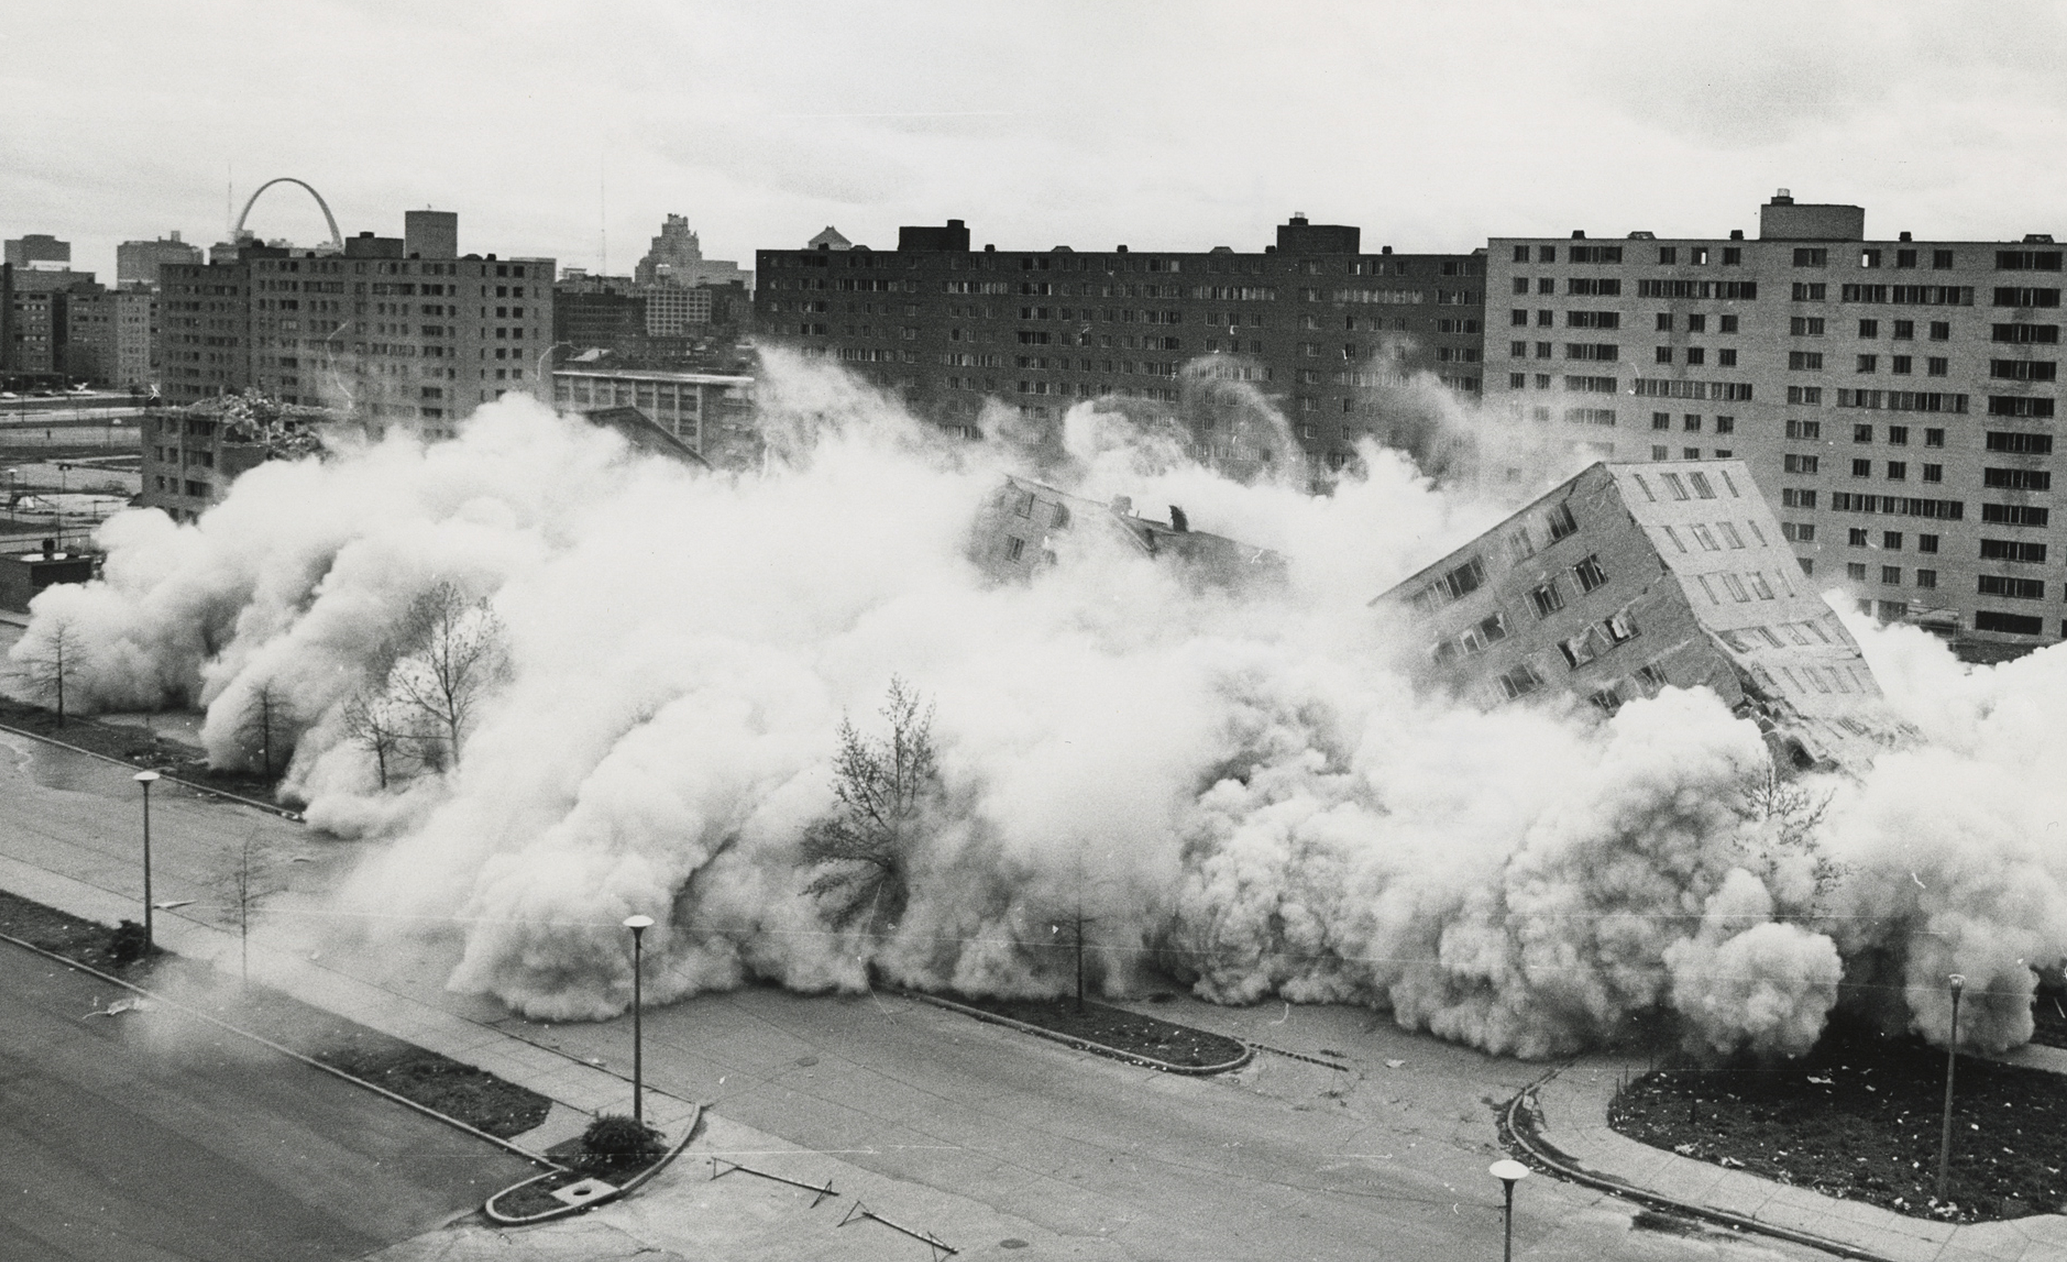 April 1972. The second, widely televised demolition of a Pruitt-Igoe building that followed the March 16 demolition.